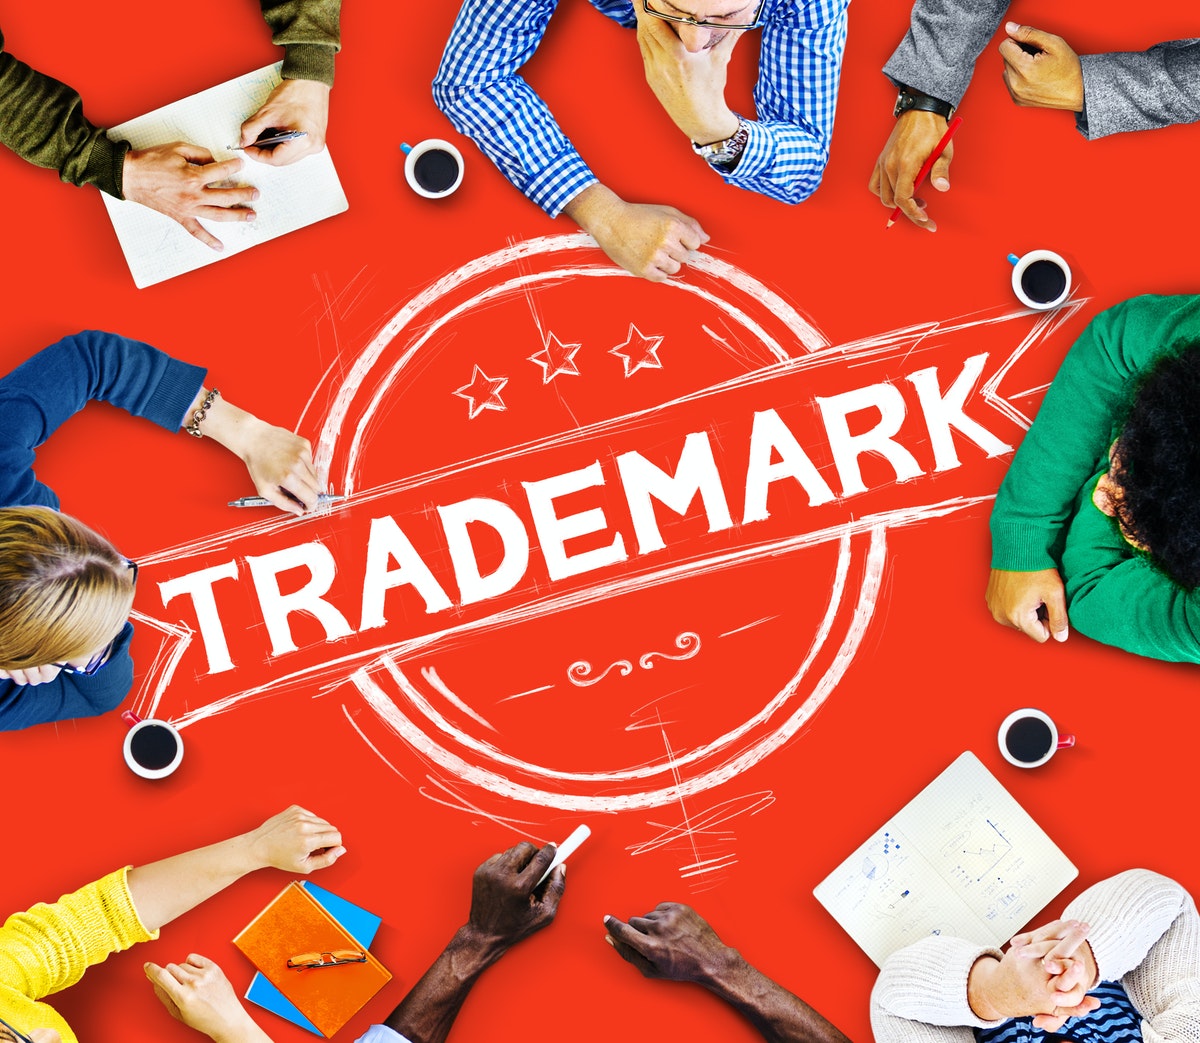 U.S. Trademark Registration: You may need an attorney.